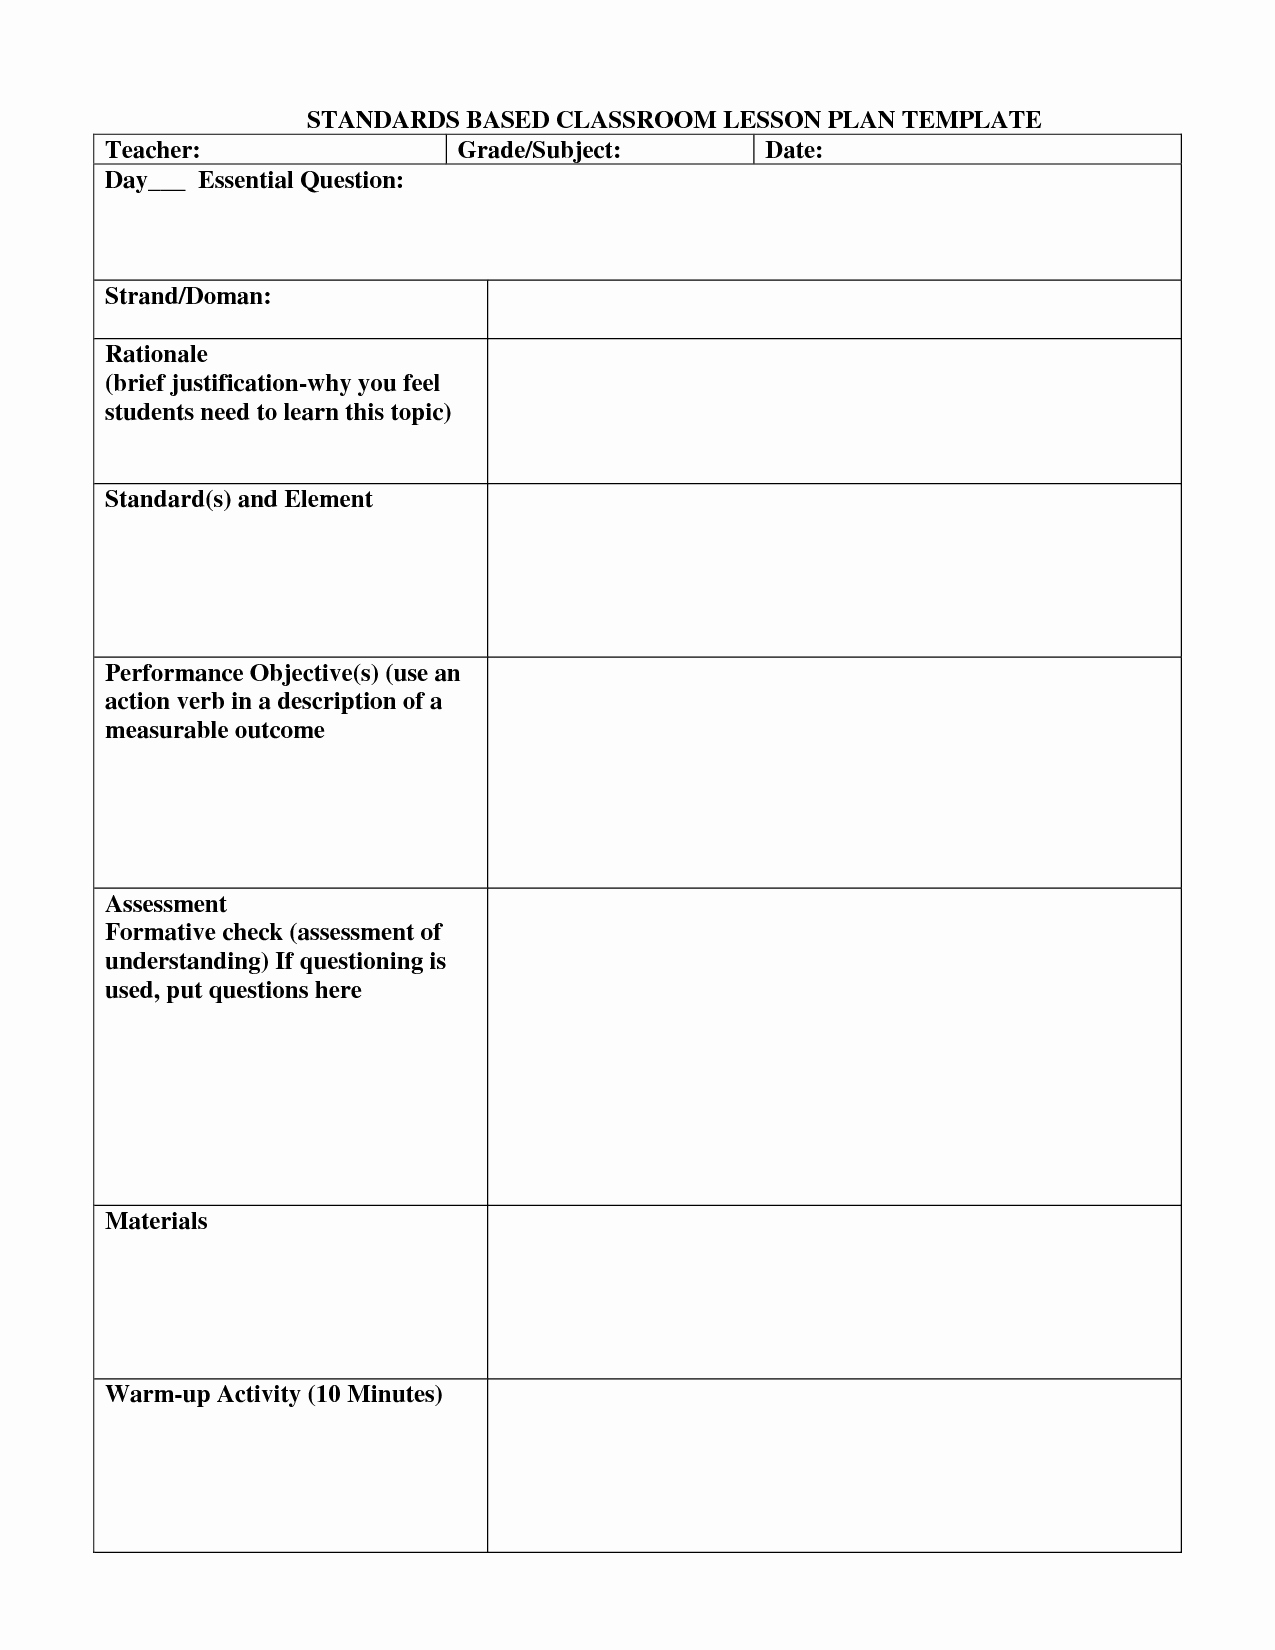 Standards Based Lesson Plan Template Beautiful Standard Based Lesson Plans Template Standards Based Lesson Template Pinterest